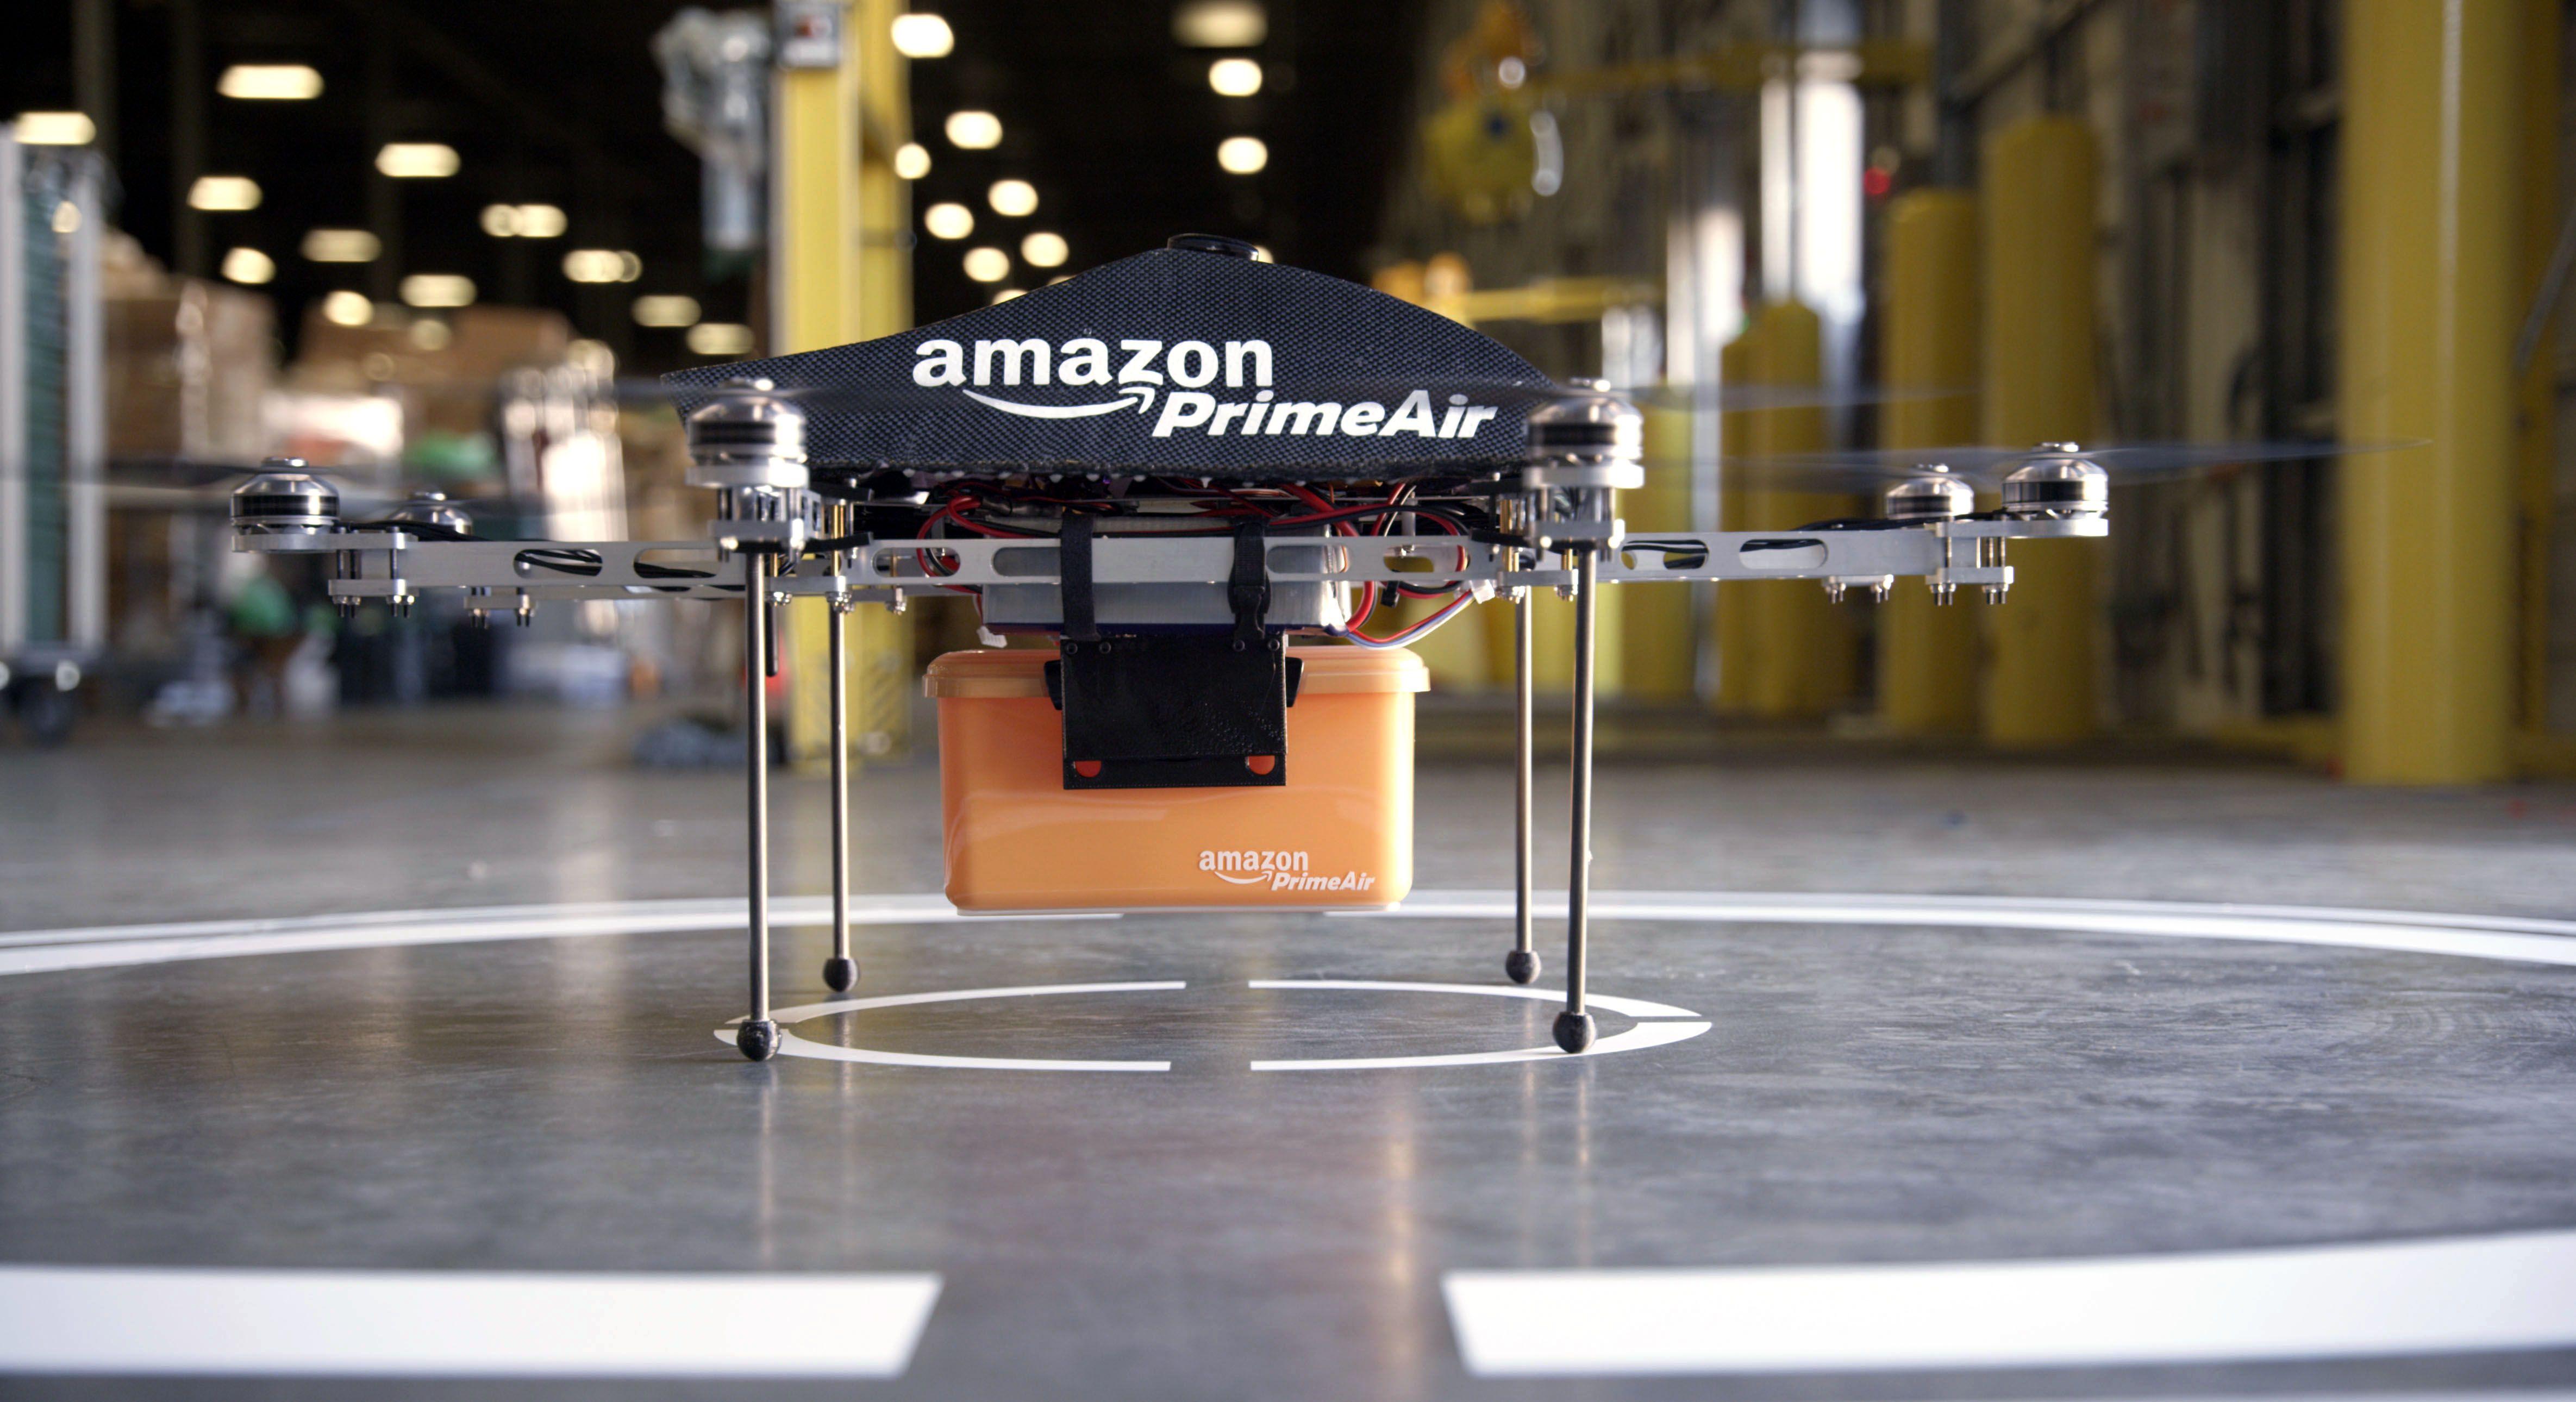 Amazon Prime Air Logo - Amazon Details How Its Drone Delivery Service Will Work | Time